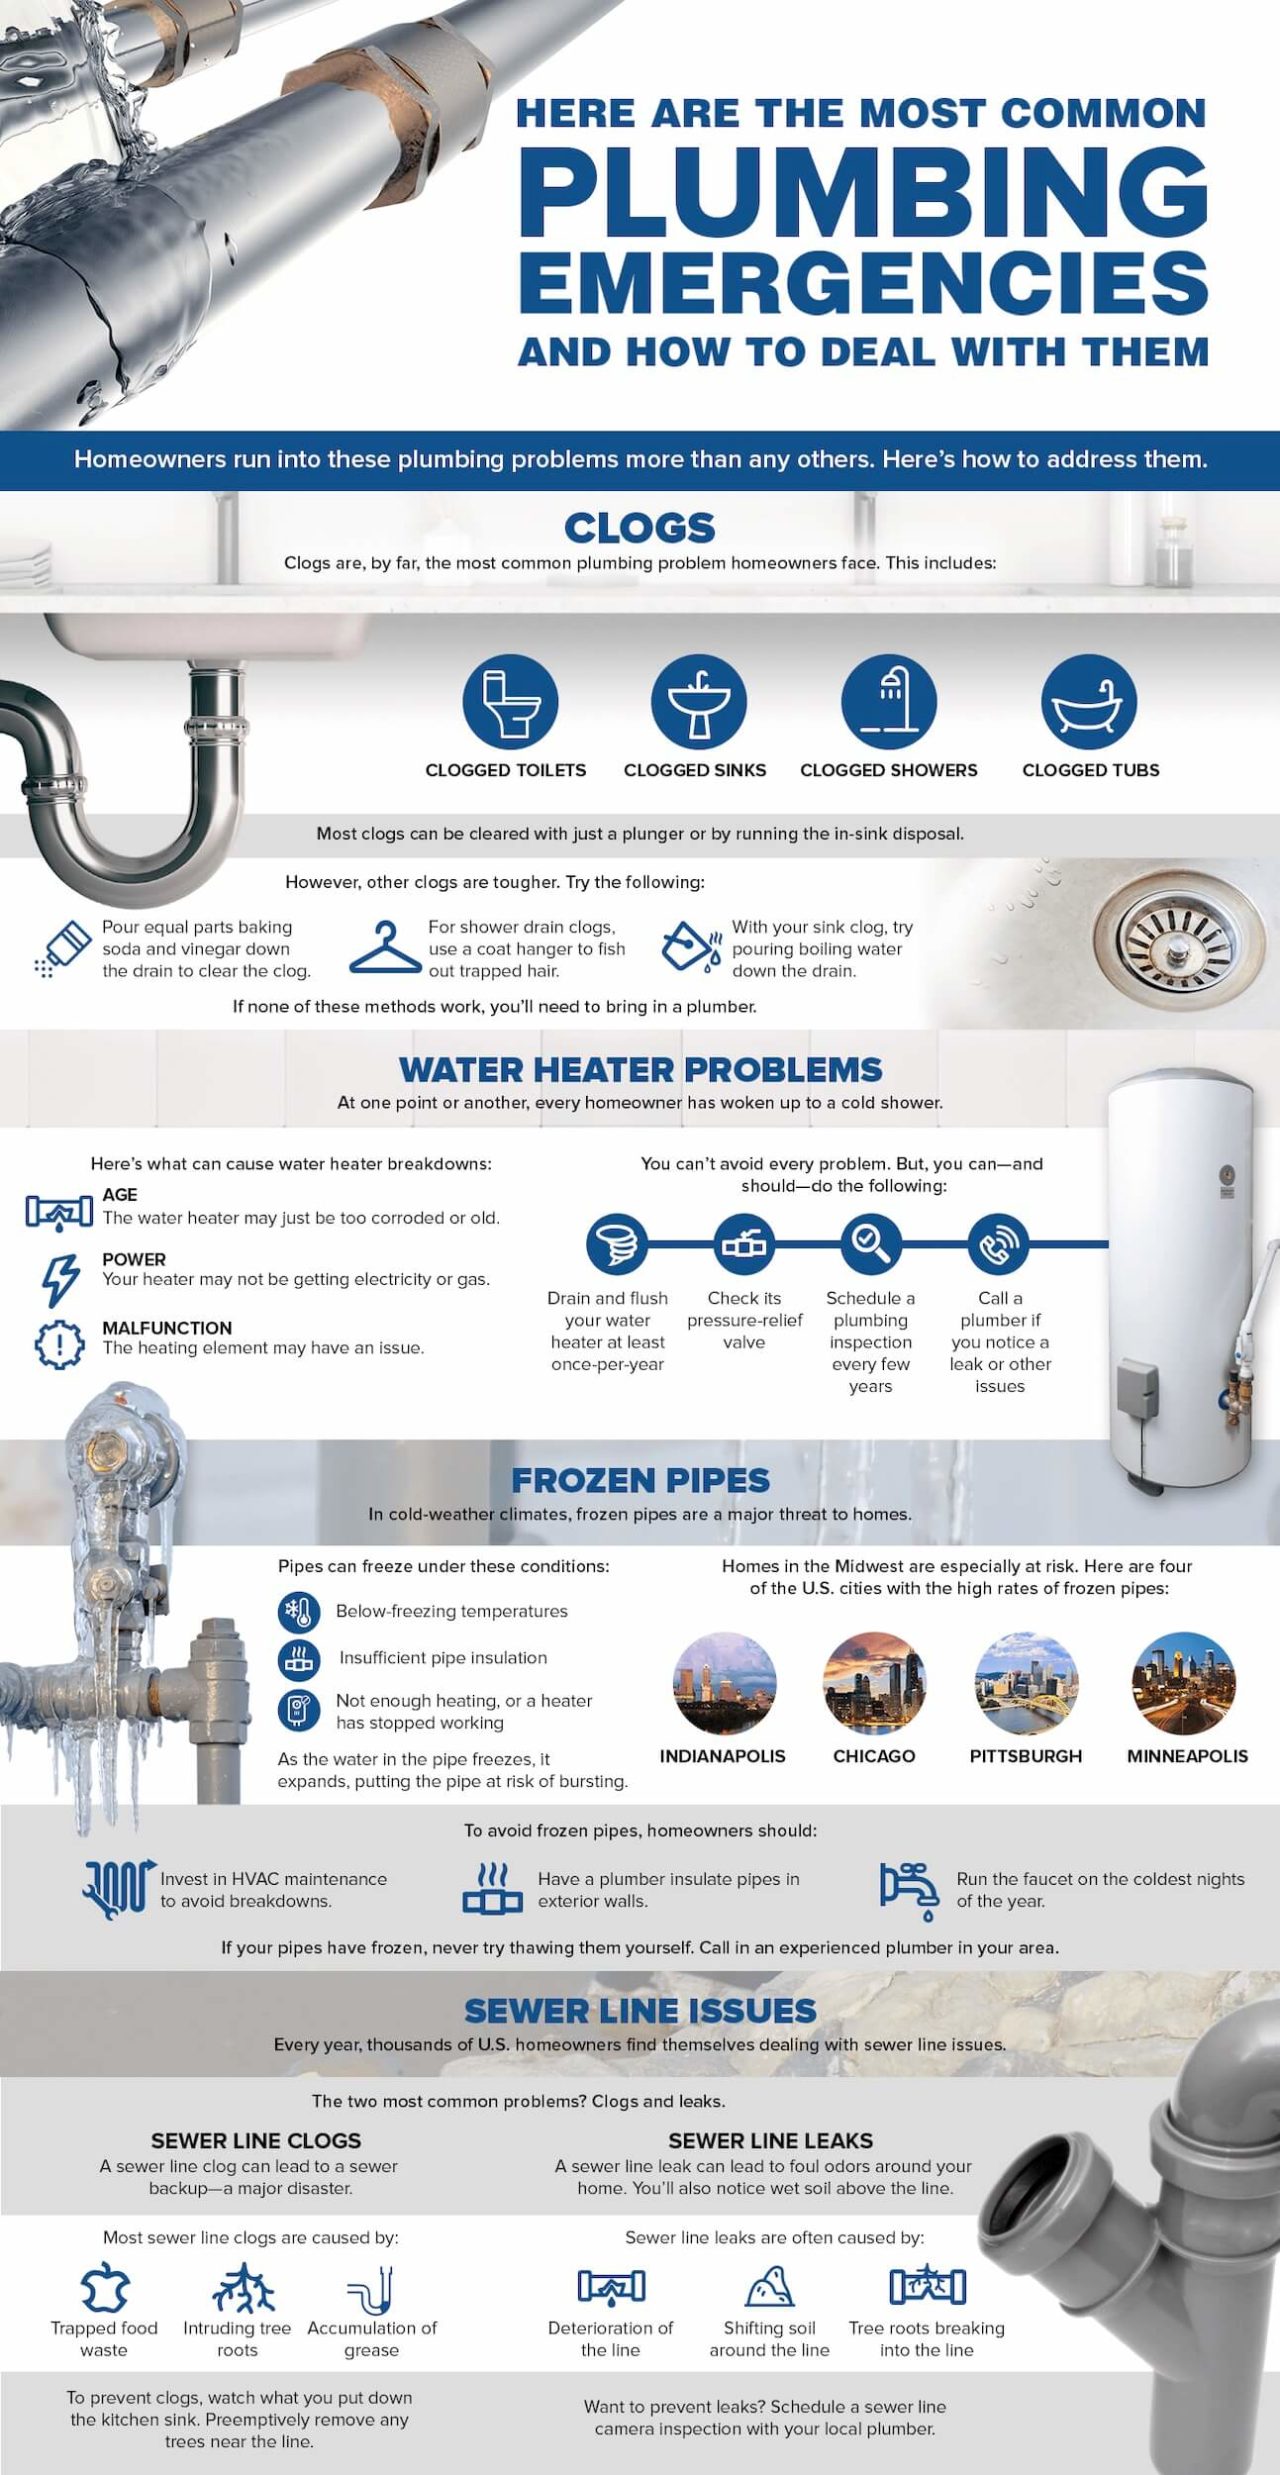 This infographic outlines some of the most common plumbing emergencies and what homeowners should do about them.